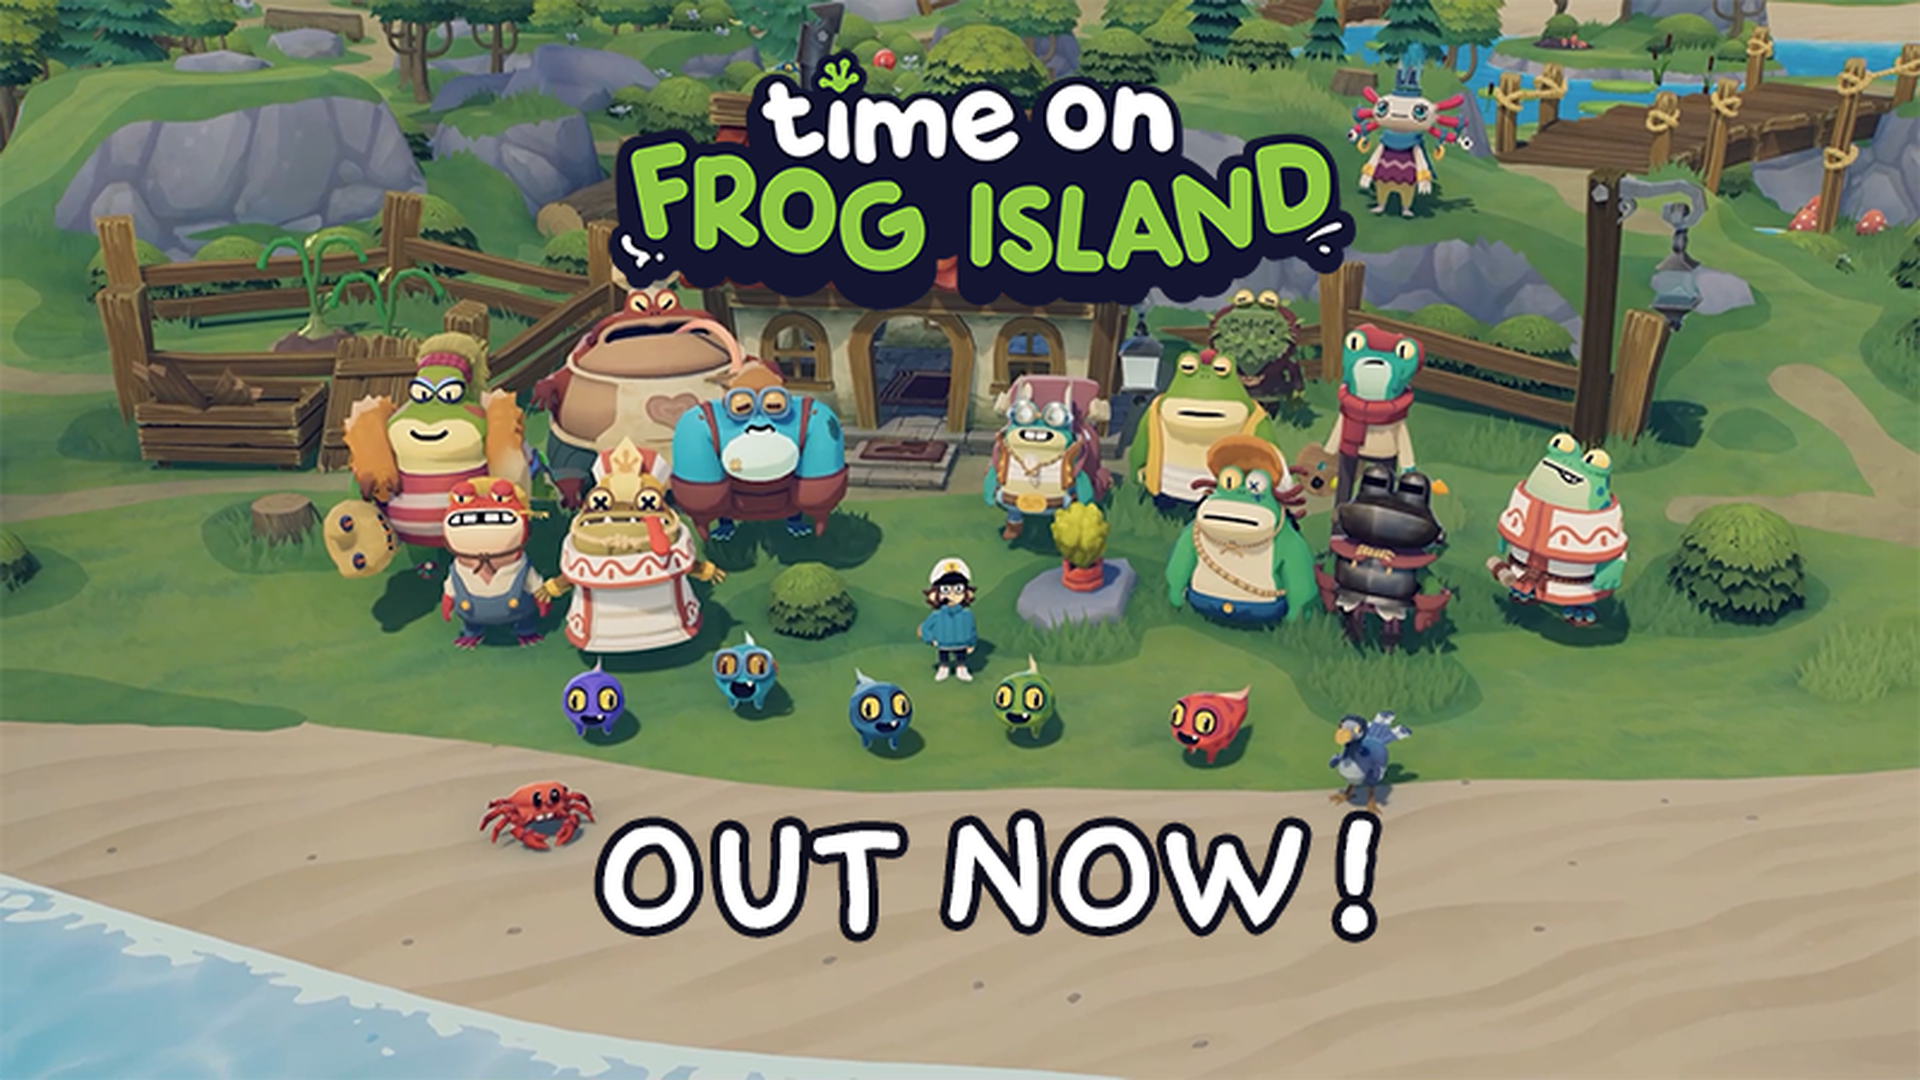 Time on Frog Island is Out Now!